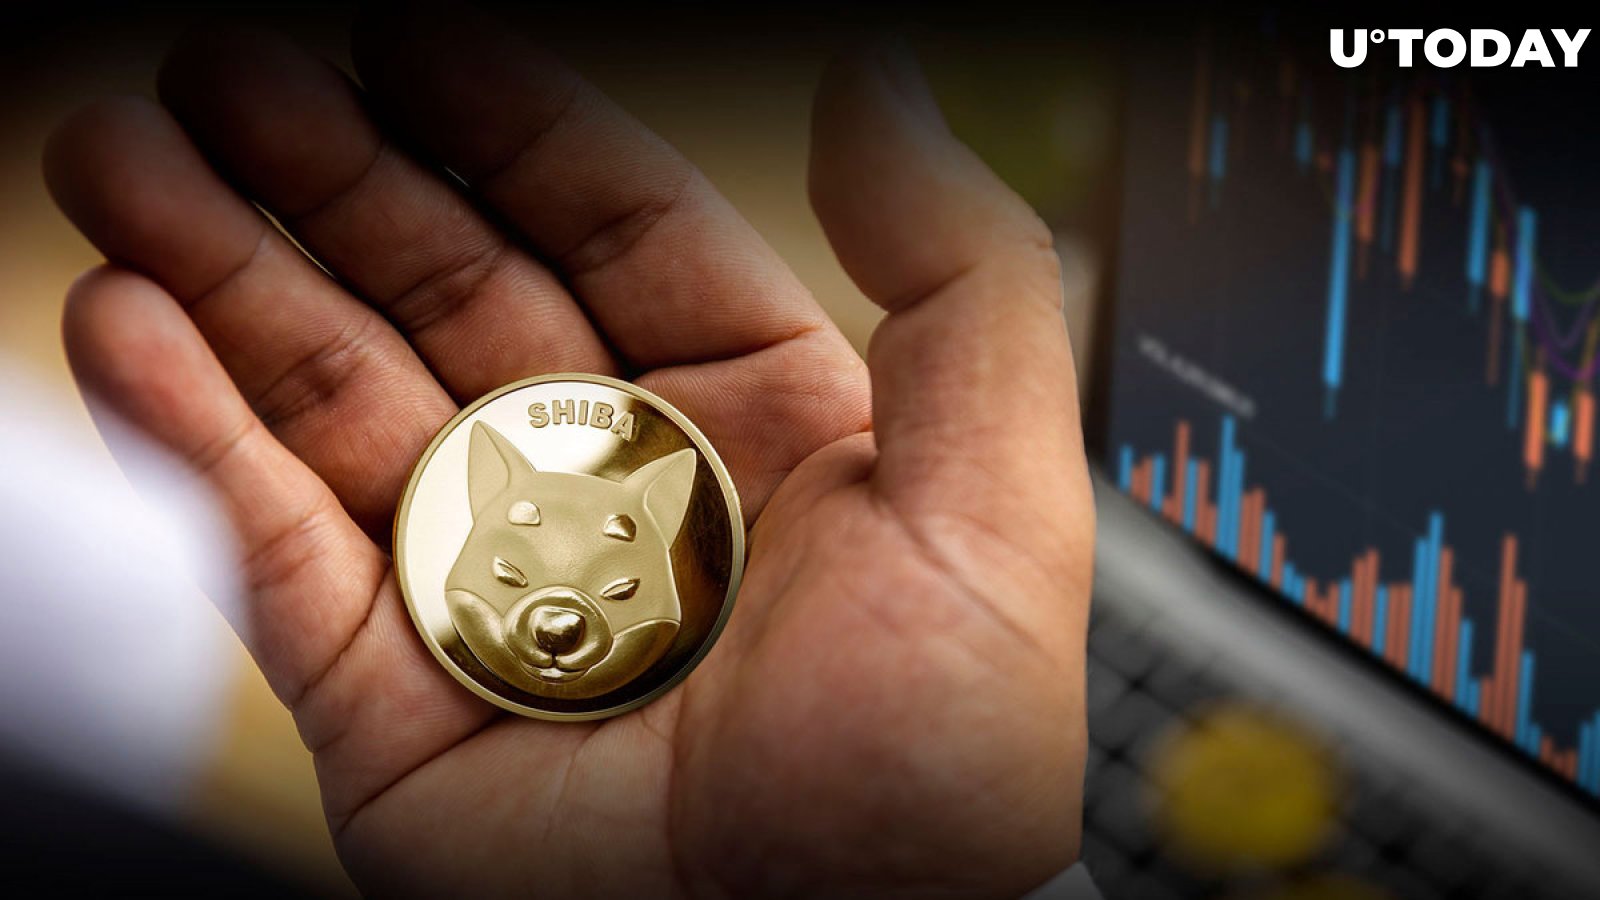 SHIB's Market Cap Soars, Coin Regains 16th Place, Here's What's Pushing It